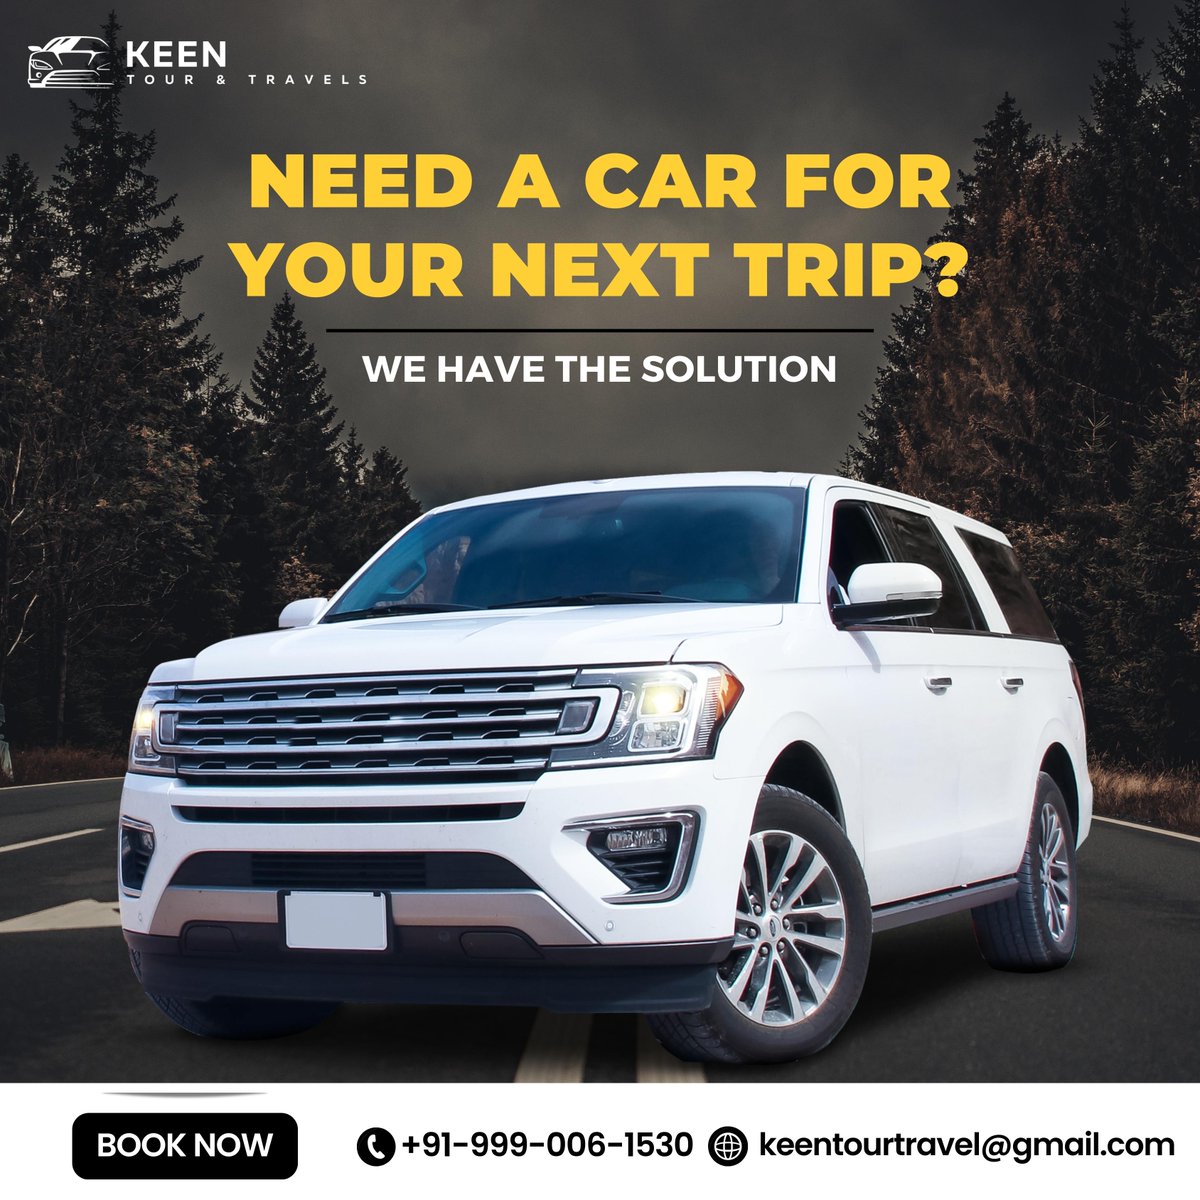 NEED A CAR FOR YOUR NEXT TRIP?

#keen #tourstravel #keentourstravel
#travel #travelyourplace #dreamplace #trip #vacation #gowithus #adventure #roadtrip #booknow #bookingcab #longdrive #bookyourcab #visitwithus #cab #delhicabservice #delhicab #cabdriver #cheapcabindelhi